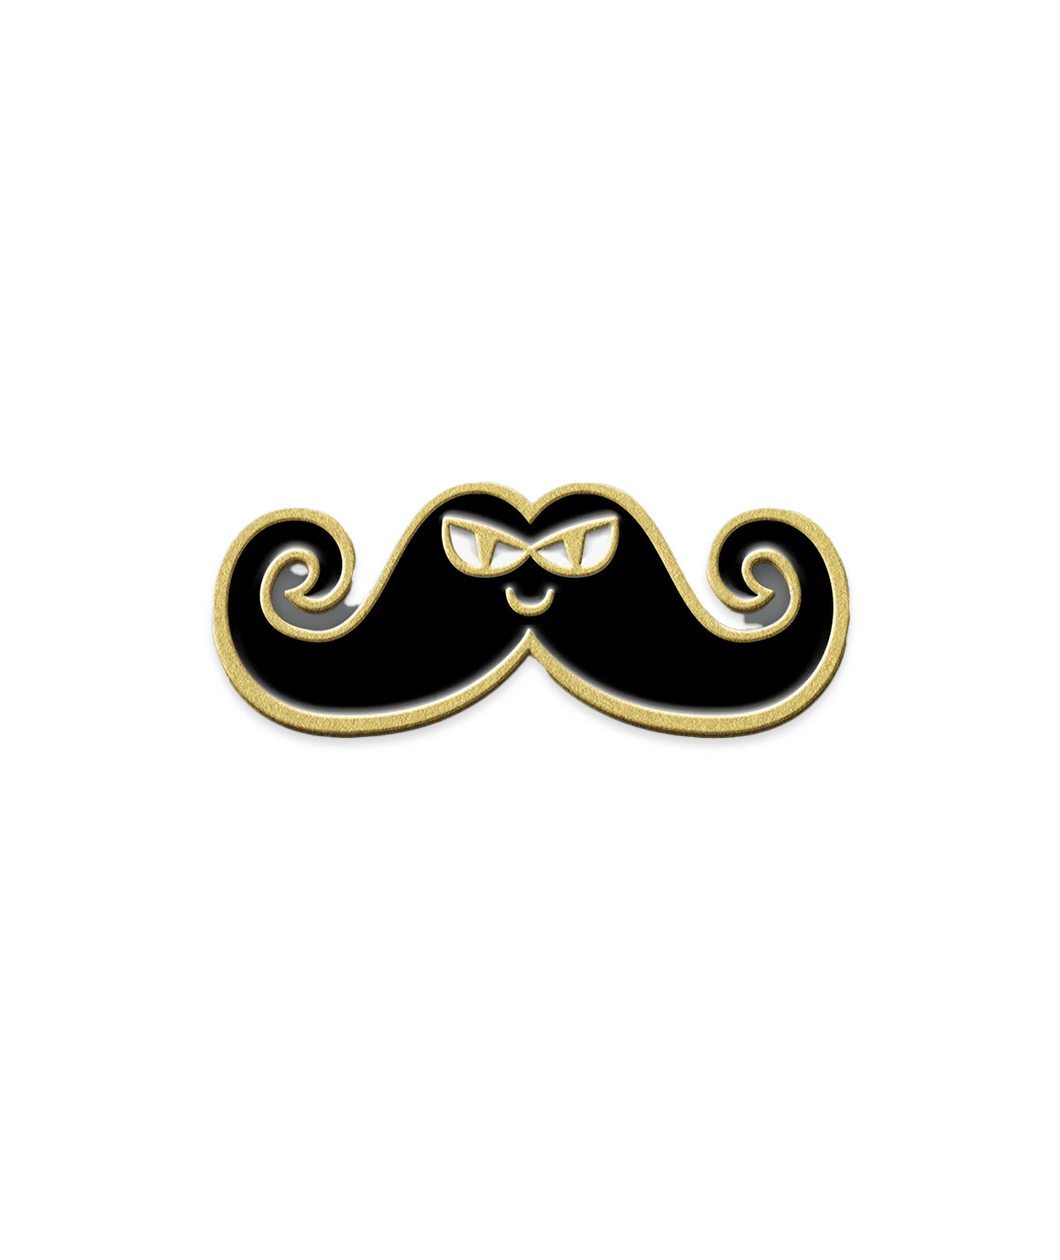 Gold plated enamel pin with black mustache that has an evil face and curly ends.